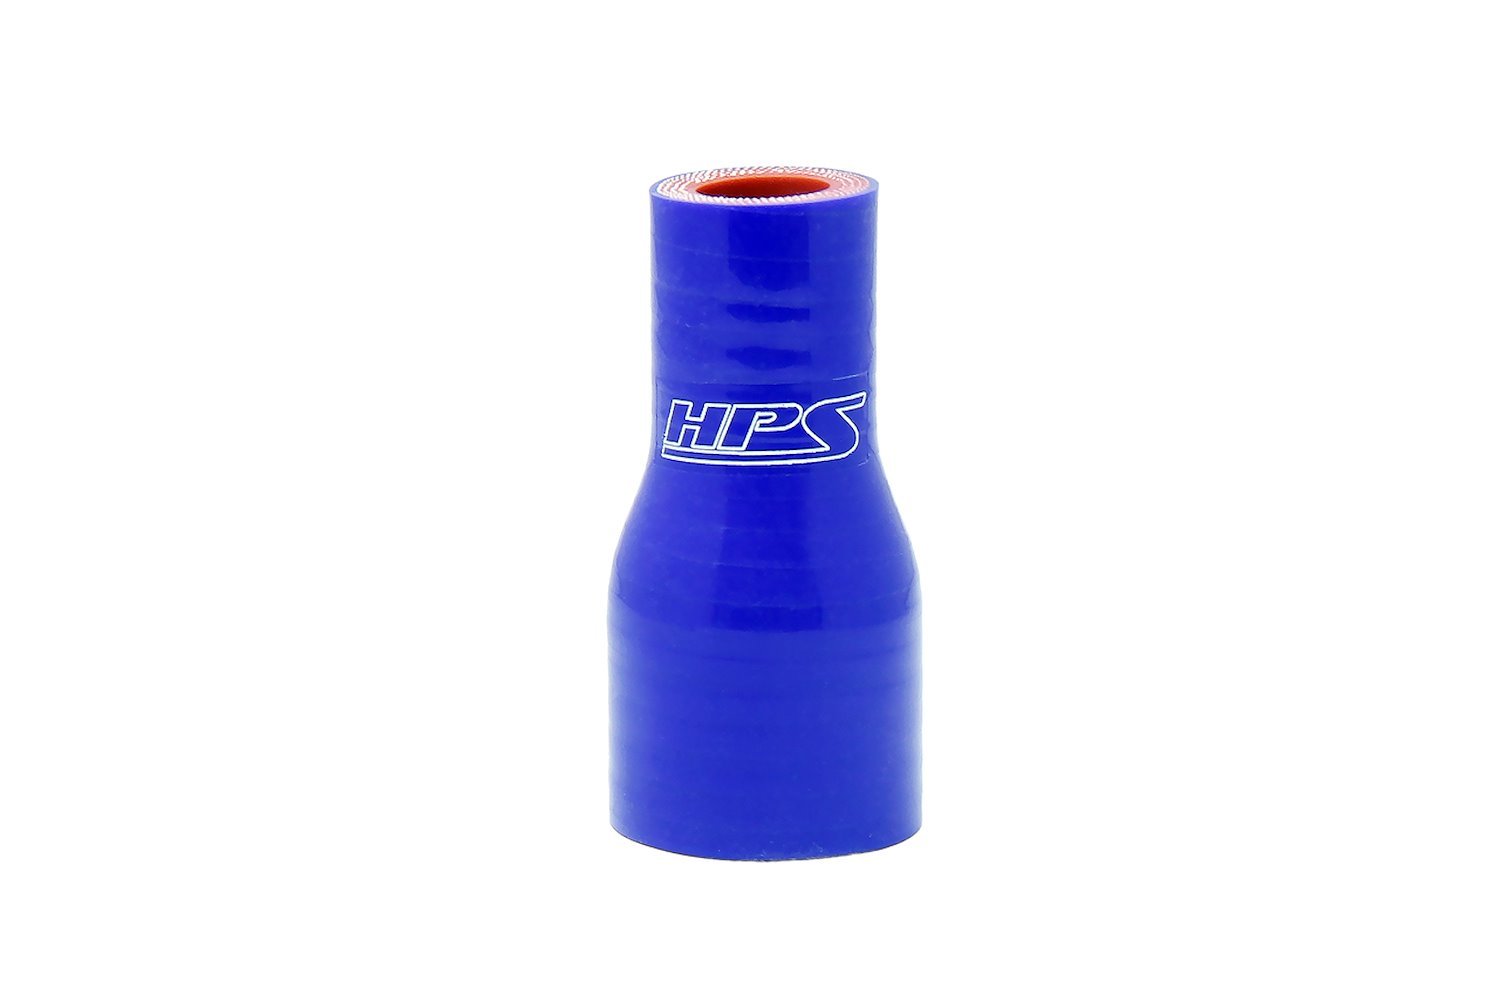 HTSR-112-125-BLUE Silicone Reducer Hose, High-Temp 4-Ply Reinforced, 1-1/8 in. - 1-1/4 in. ID, 3 in. Long, Blue